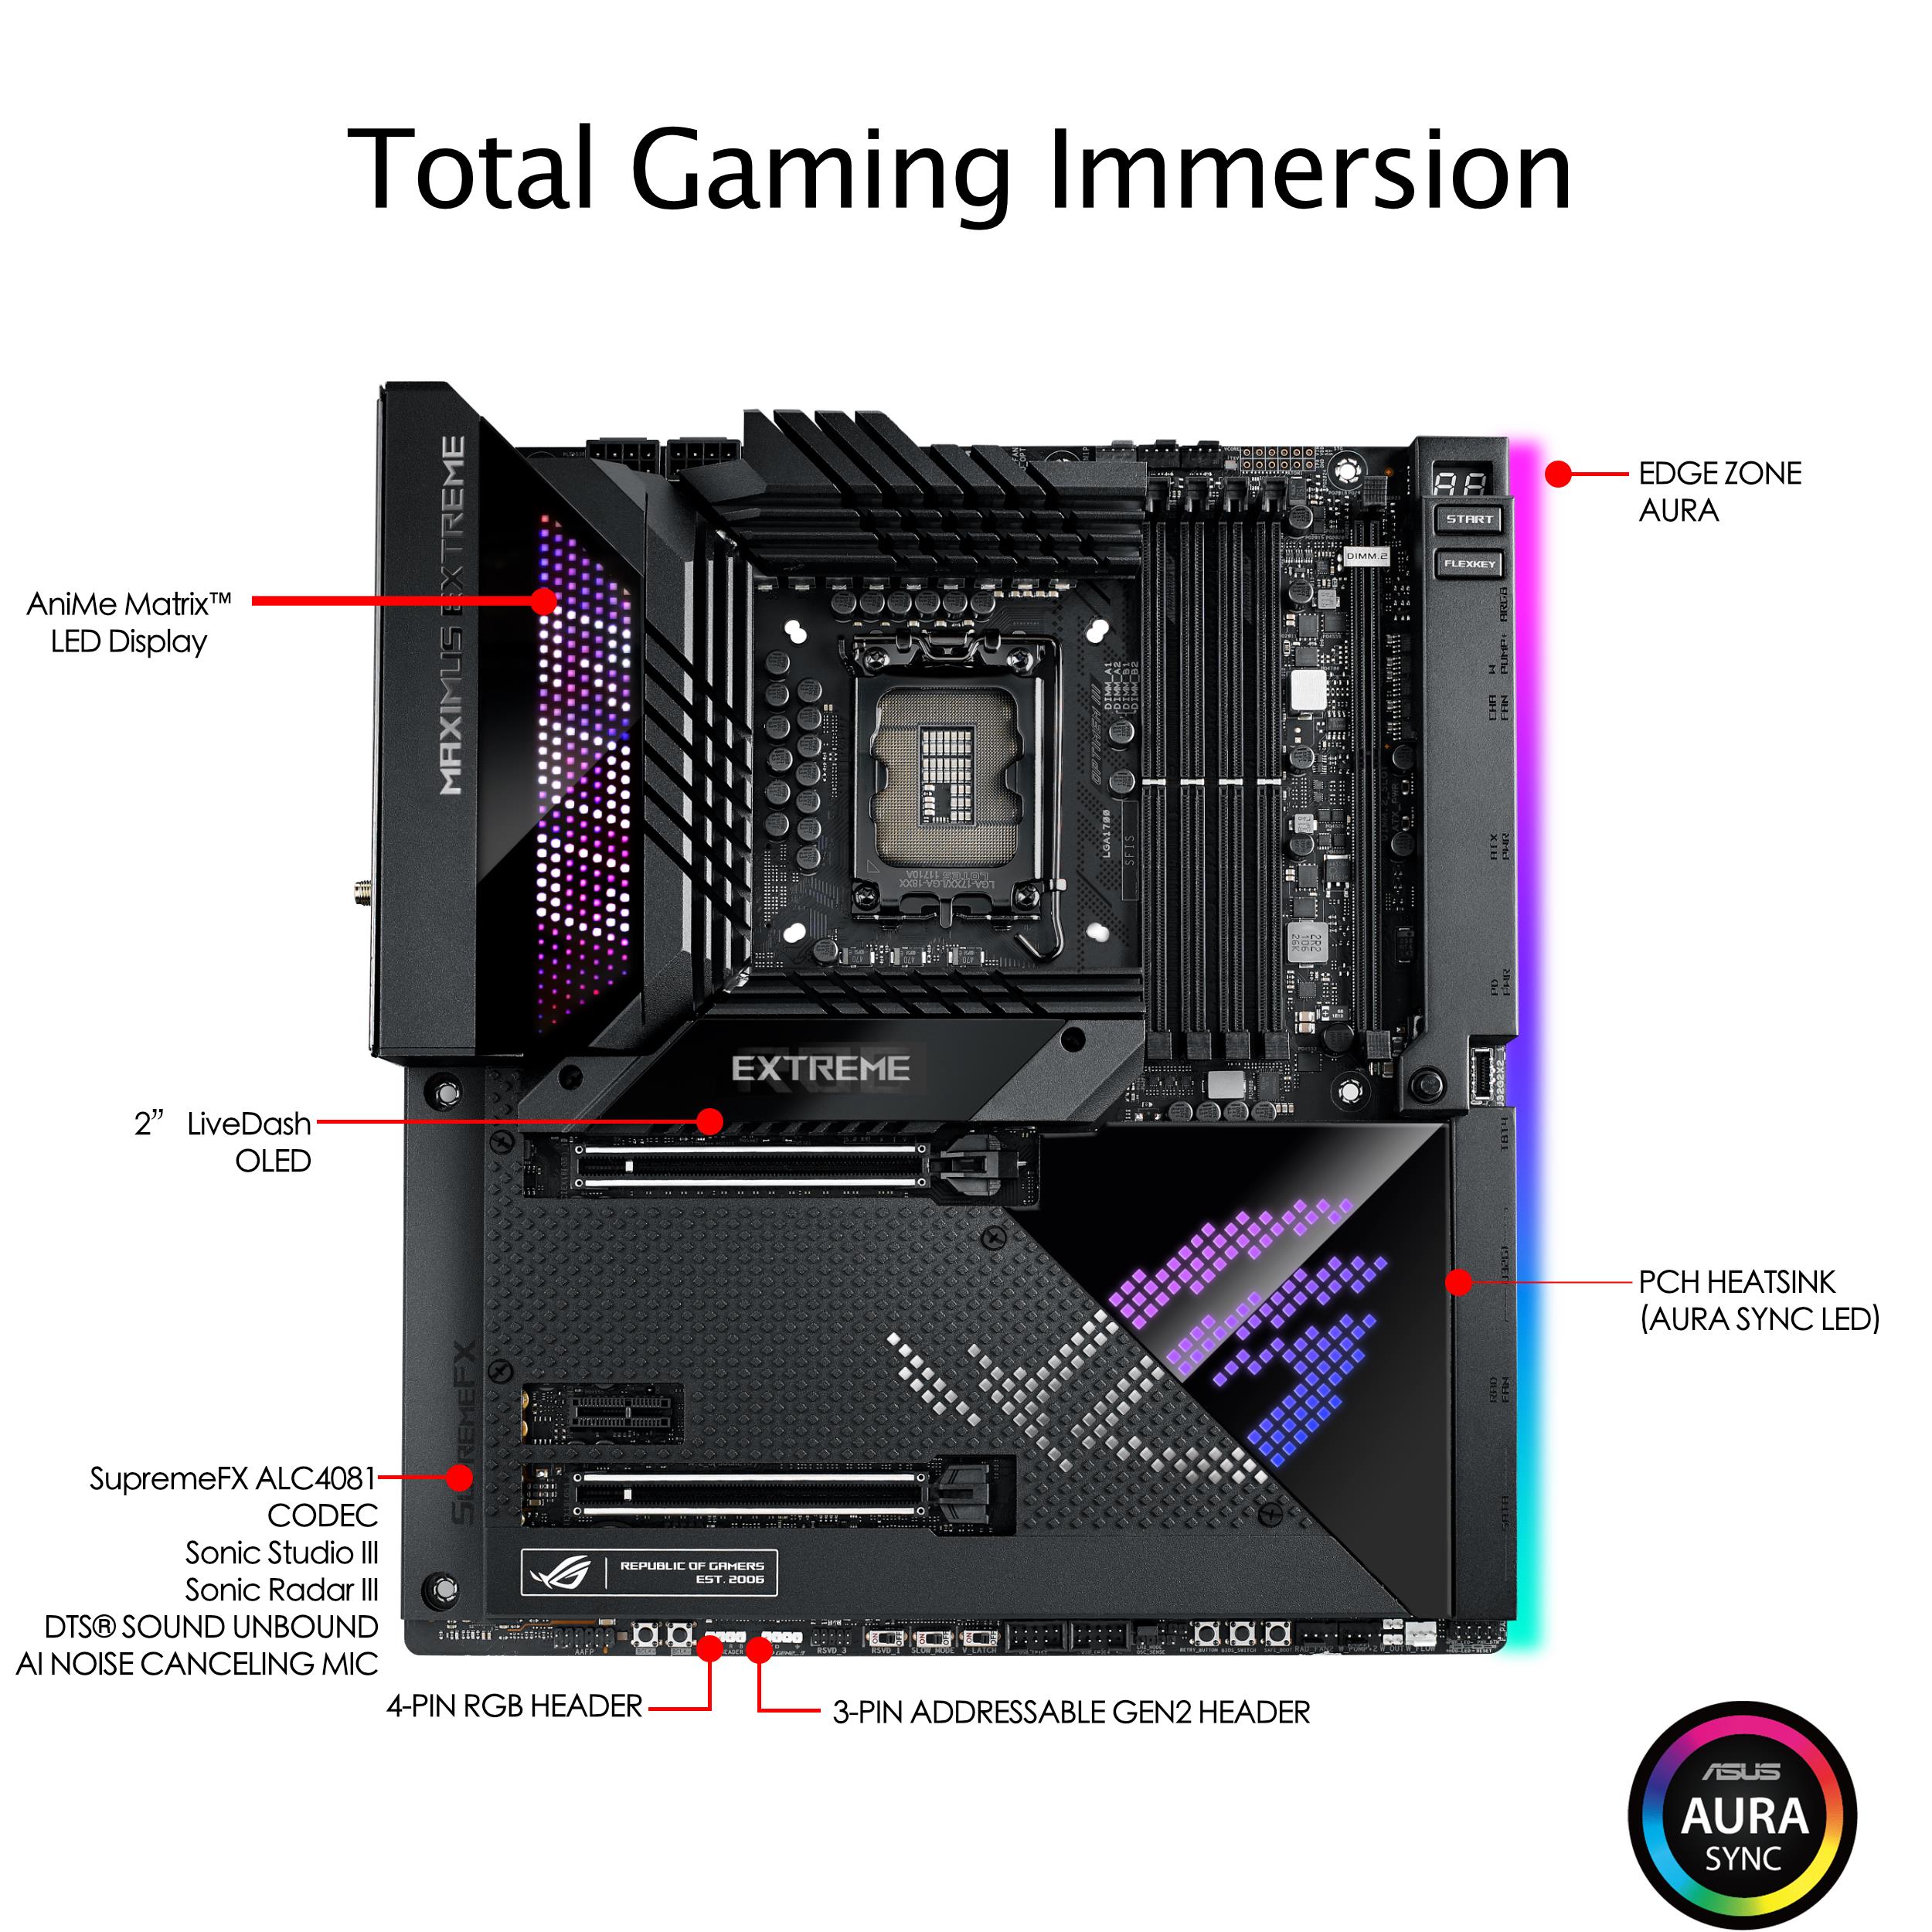 A large marketing image providing additional information about the product ASUS ROG Maximus Z690 Extreme LGA1700 eATX Desktop Motherboard - Additional alt info not provided